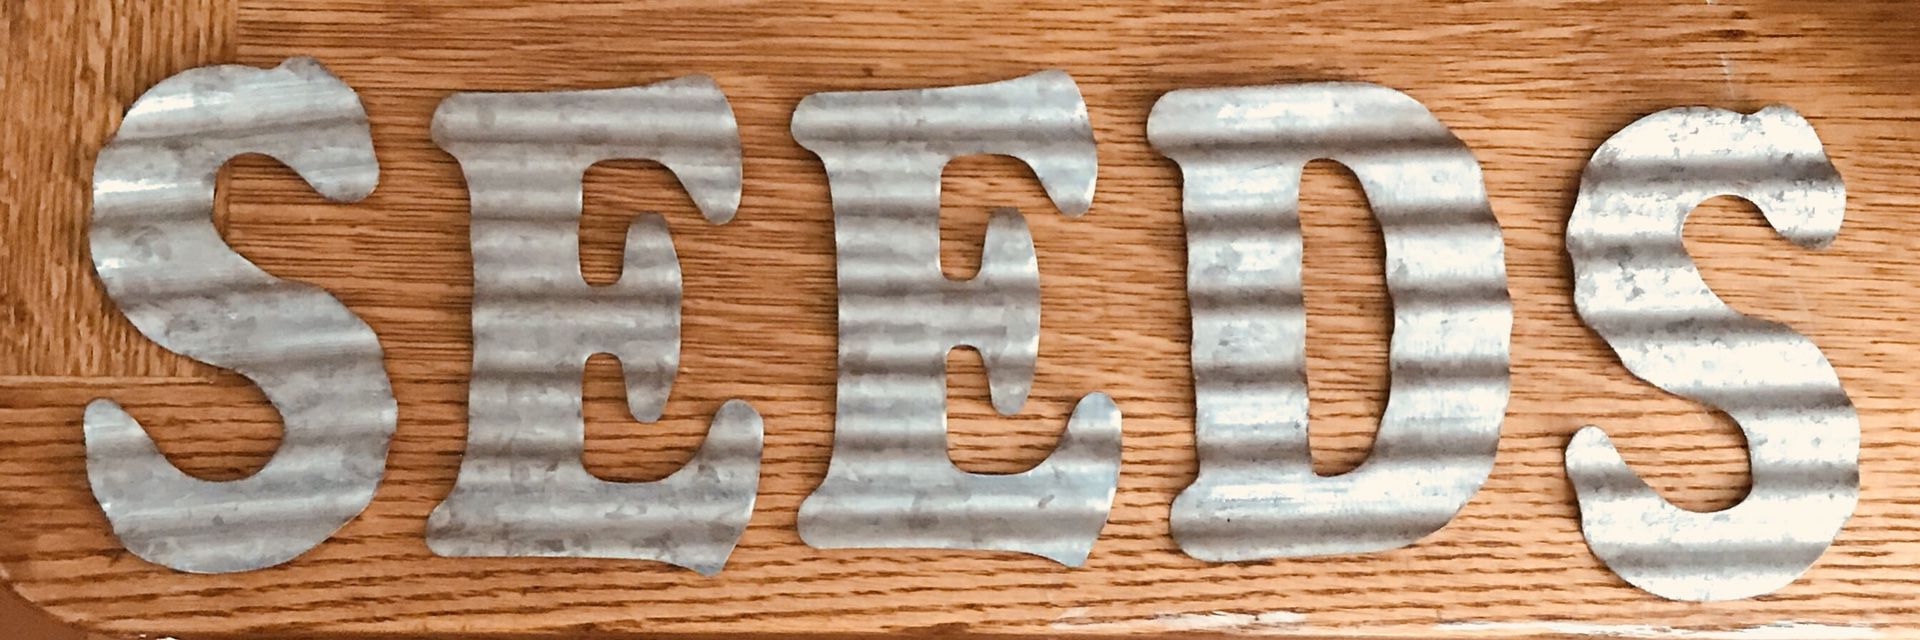 Galvanized metal “SEEDS” letters sign wall display decor garden potting shed